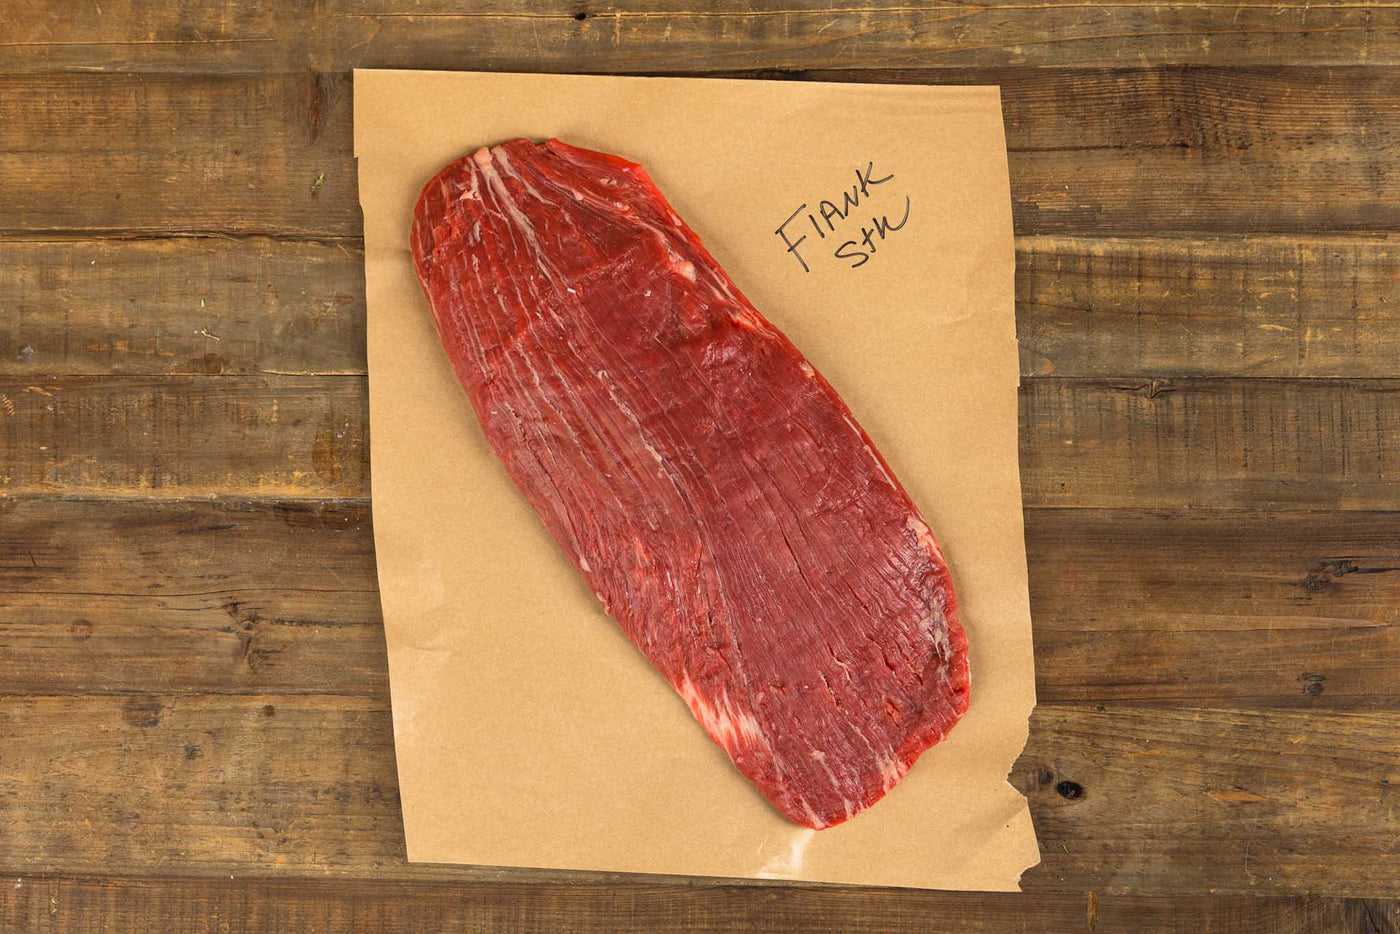 BEEF FLANK STEAK #18 20 LBS – Mad Butcher Meat Co.